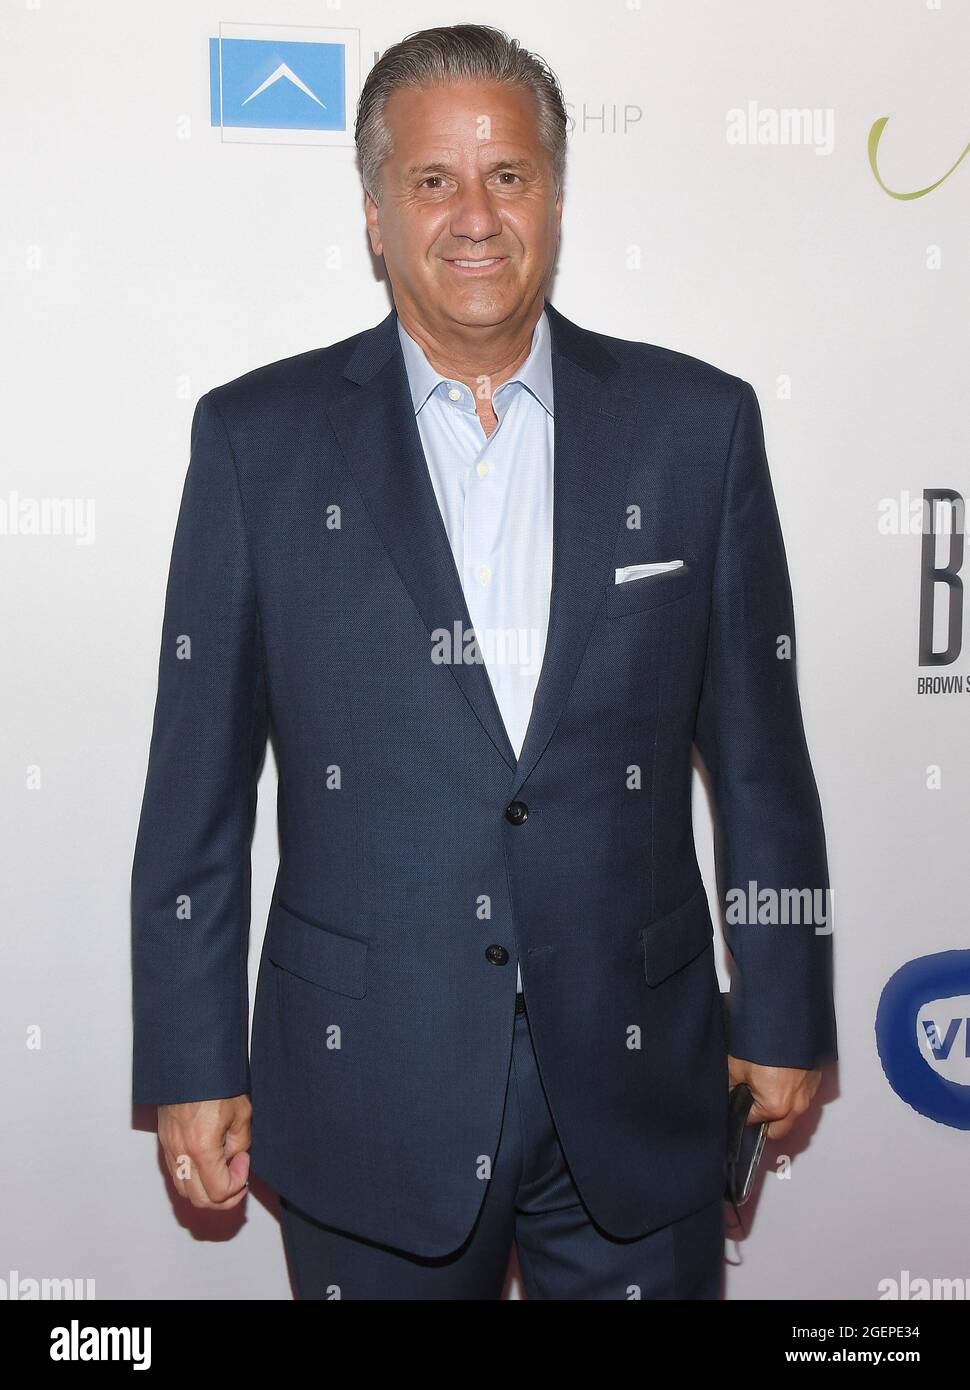 John Calipari arrives at the 21st Annual Harold and Carole Pump Foundation Gala held at the Beverly Hilton in Beverly Hills, CA on Friday, ?August 20, 2021. (Photo By Sthanlee B. Mirador/Sipa USA) Stock Photo